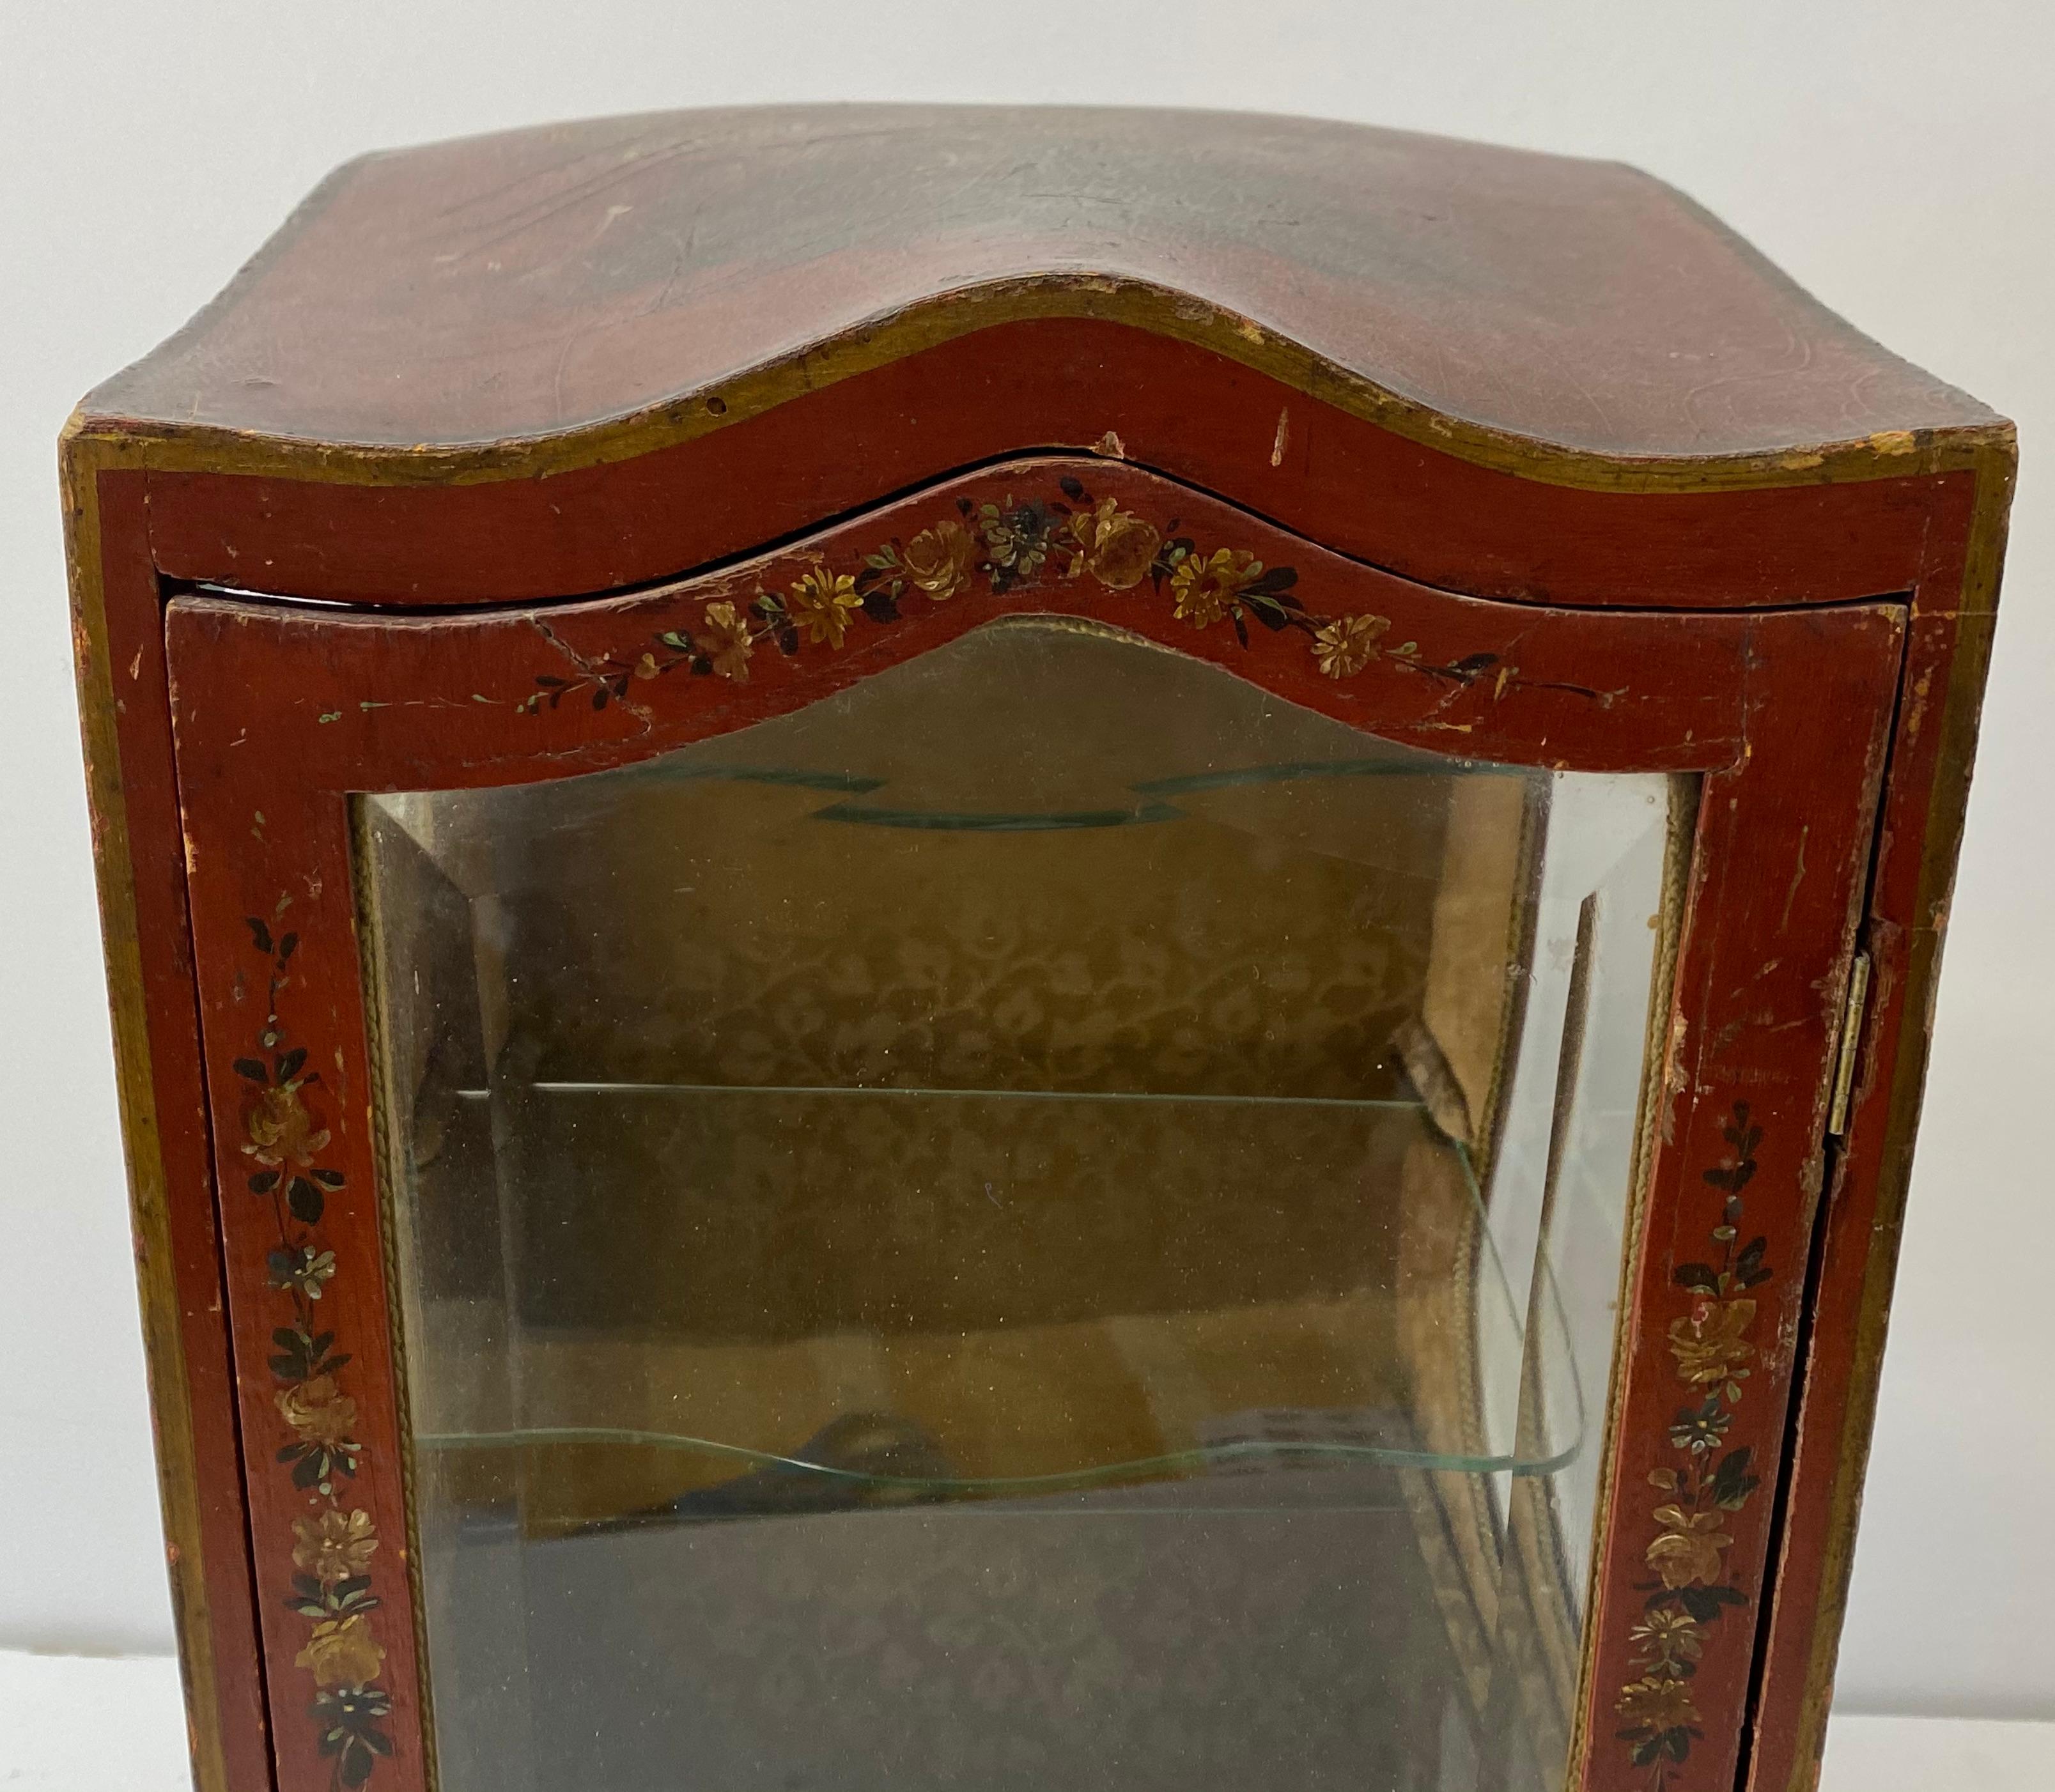 Late 19th to Early 20th Century Sedan Chair Miniature Table Top Display Cabinet In Good Condition For Sale In San Francisco, CA